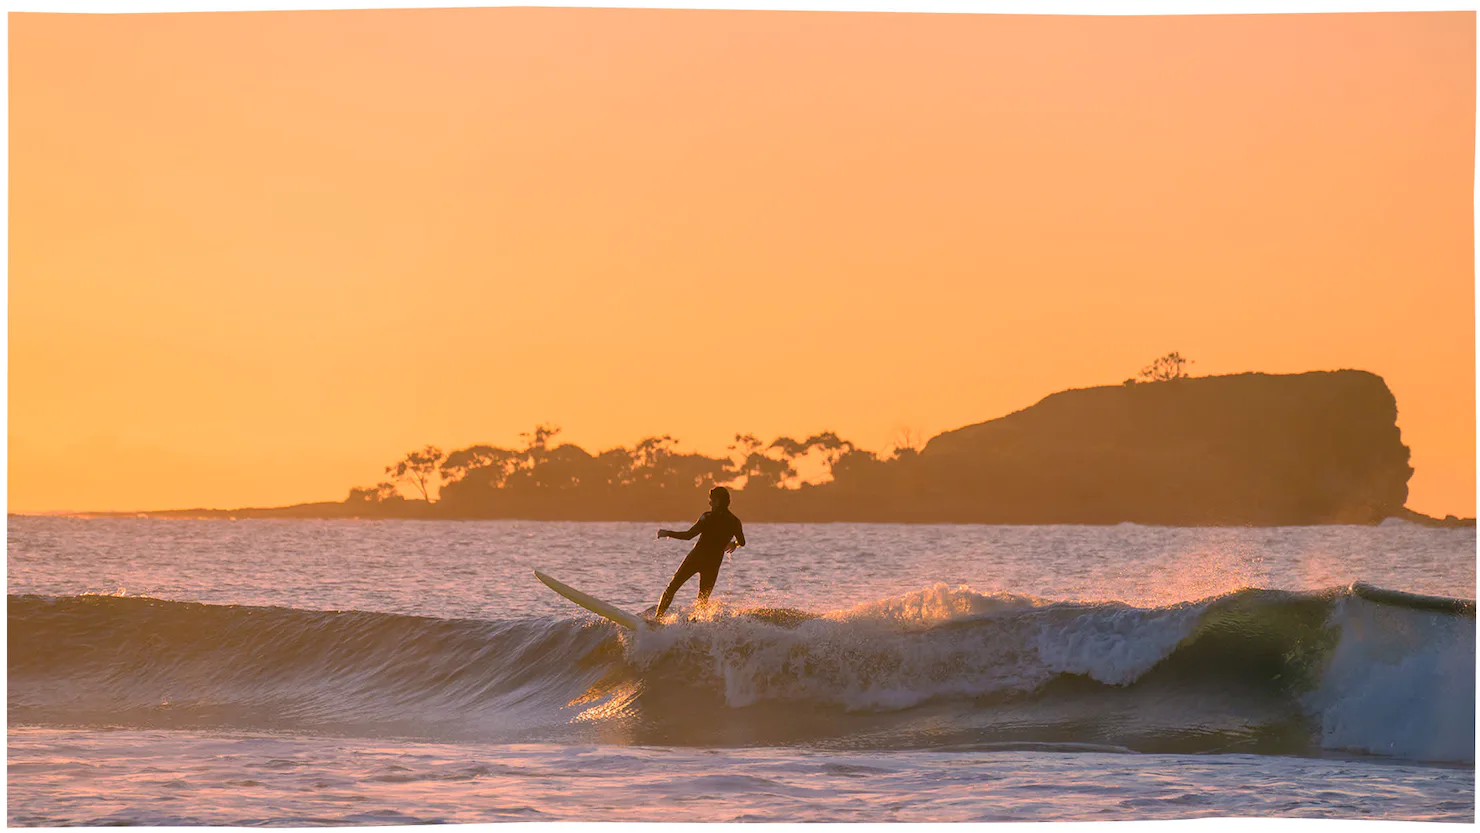 Surf and Sunsets: Riding the Waves in Australia